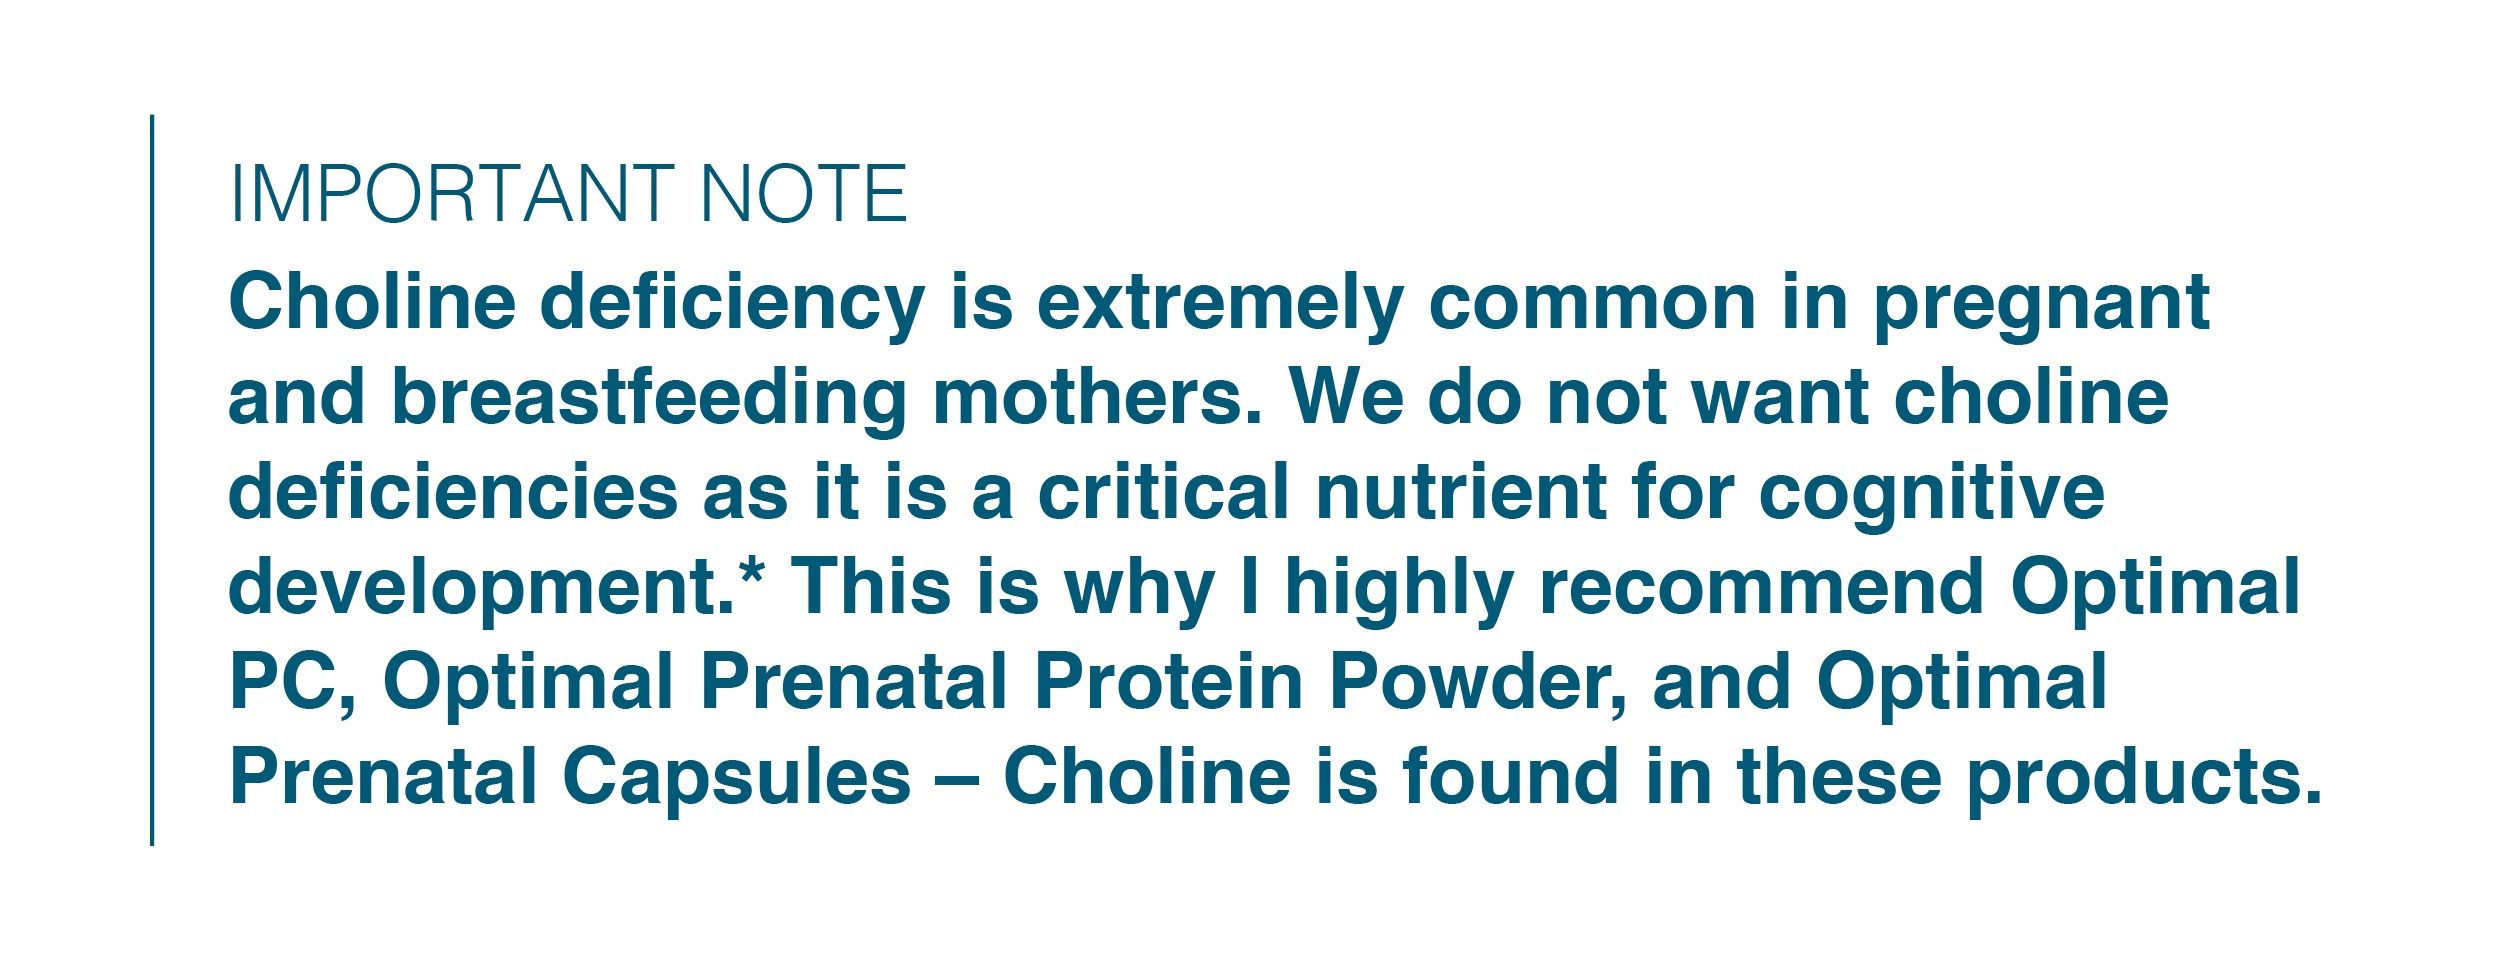 important-note-choline-2